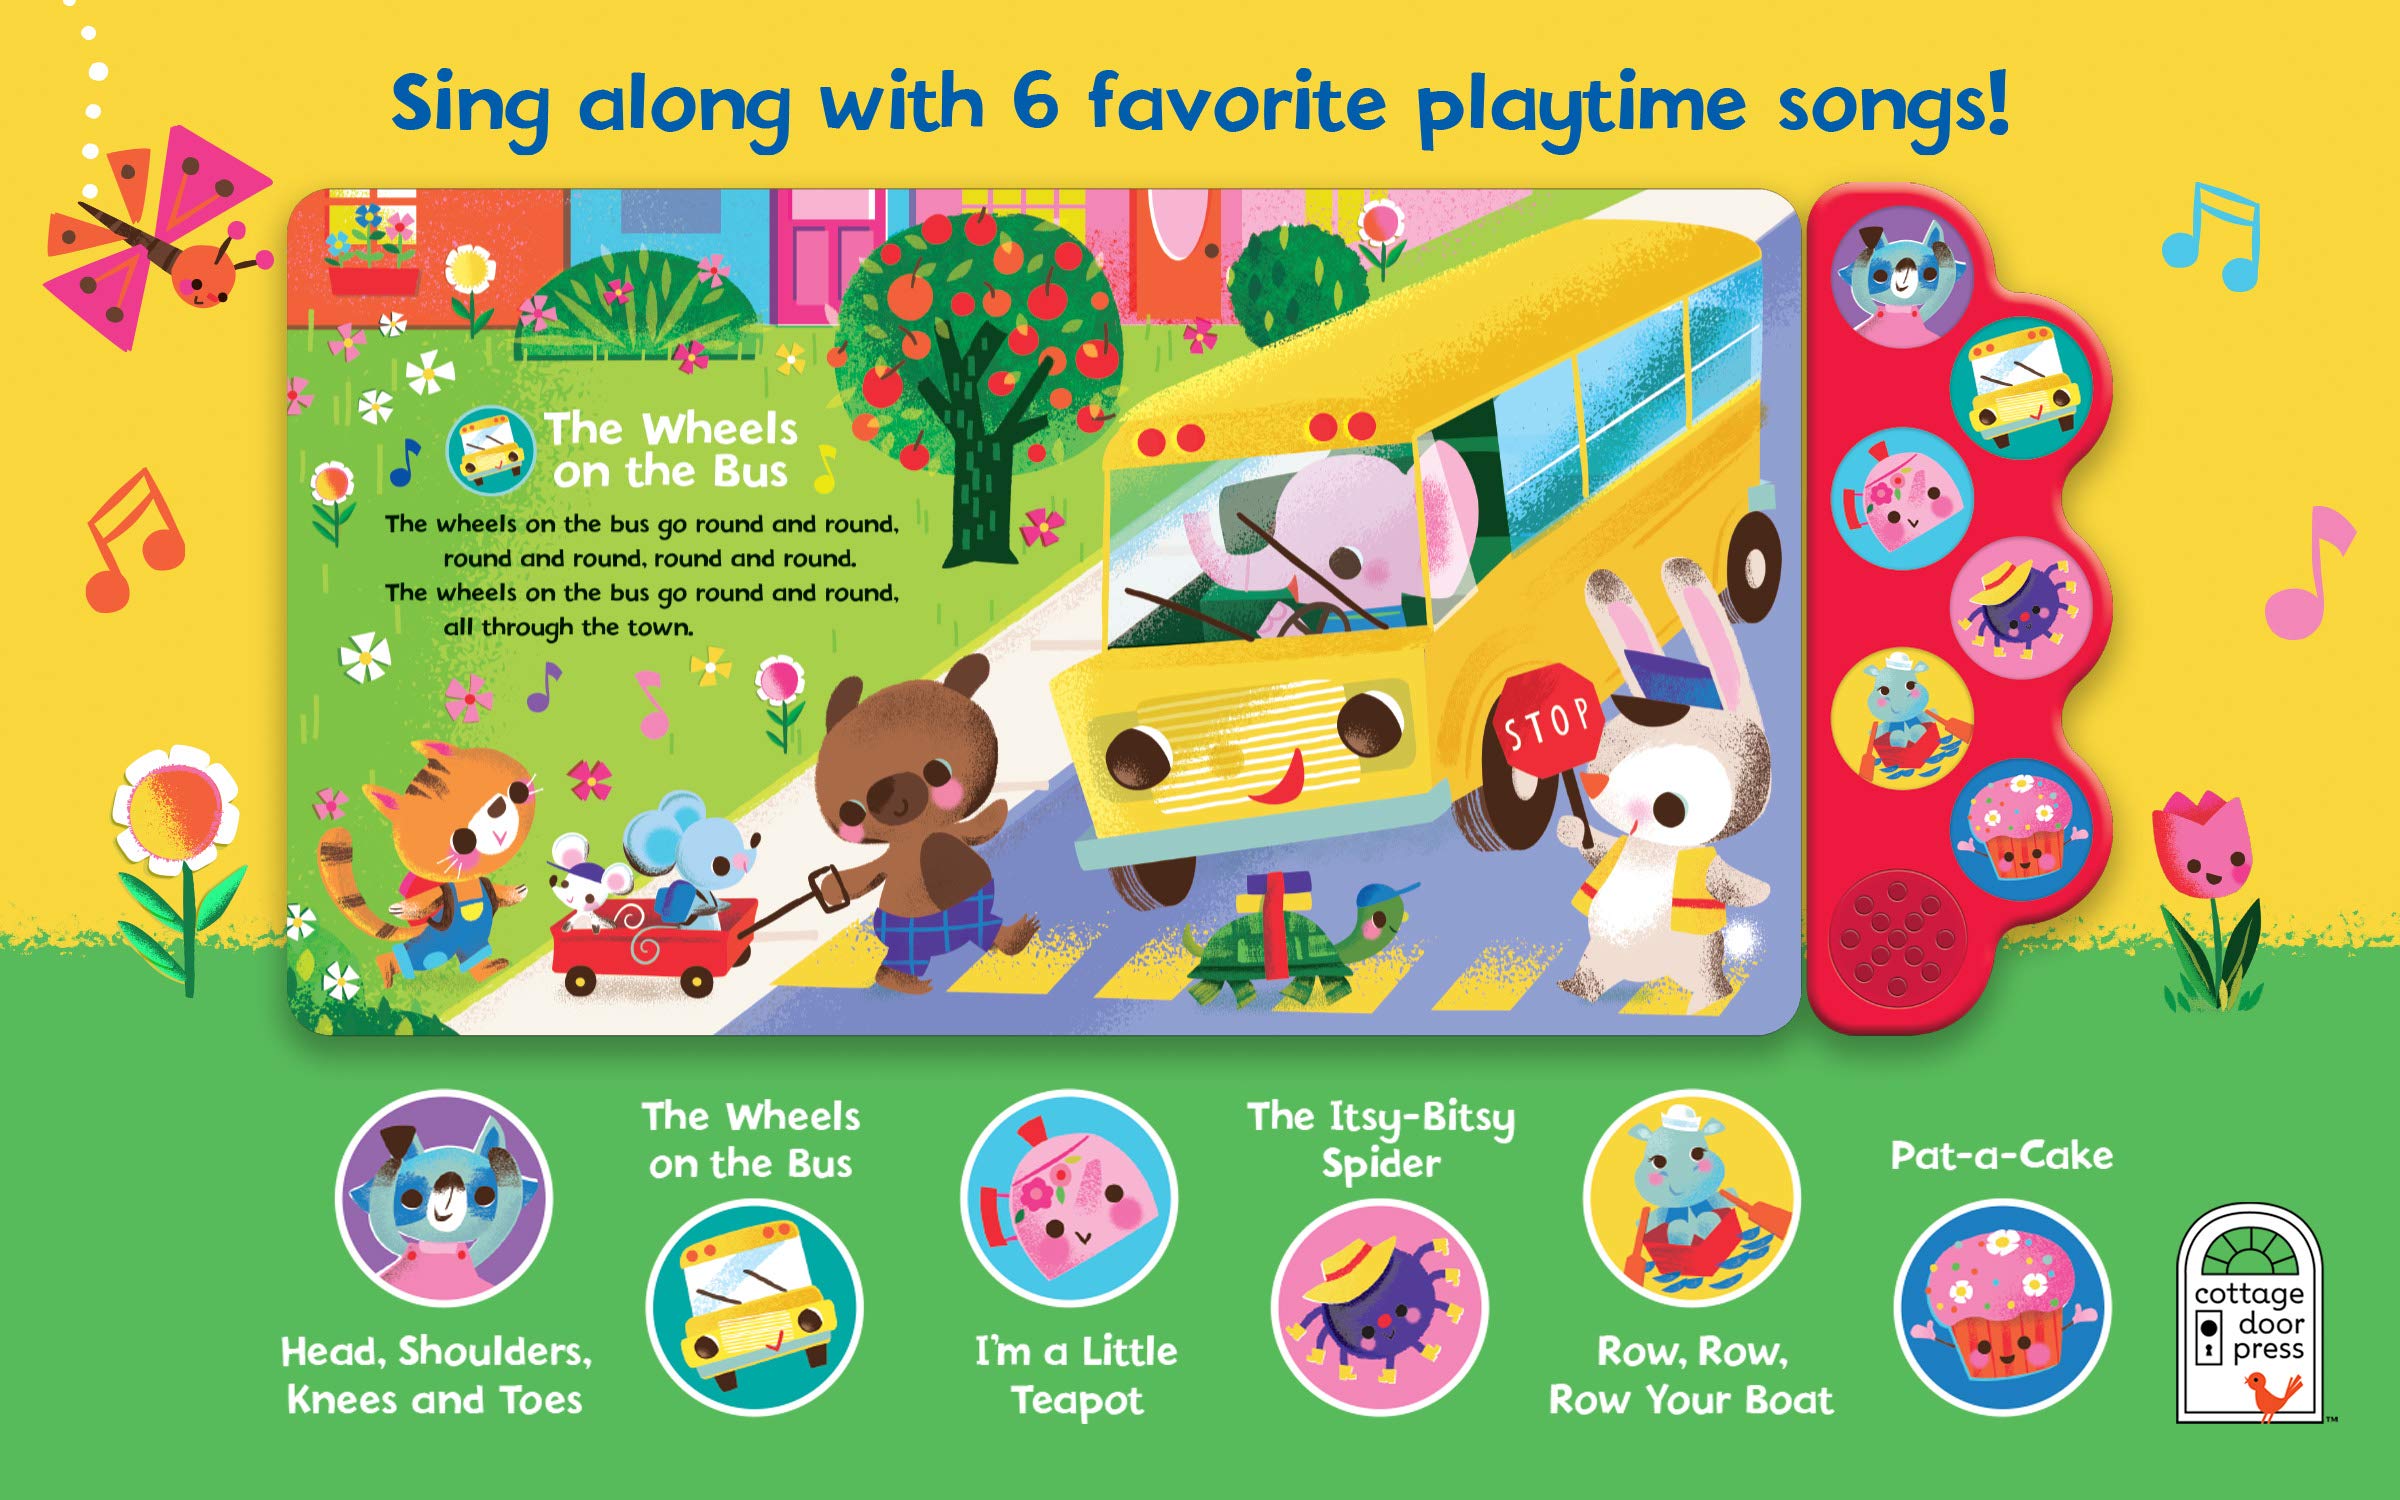 Baby's First Playtime Songs: Interactive Children's Sound Book for Babies and Toddlers Ages 1-3 with Favorite Sing-Along Tunes (Interactive Children's Song Book with 6 Sing-Along Tunes)